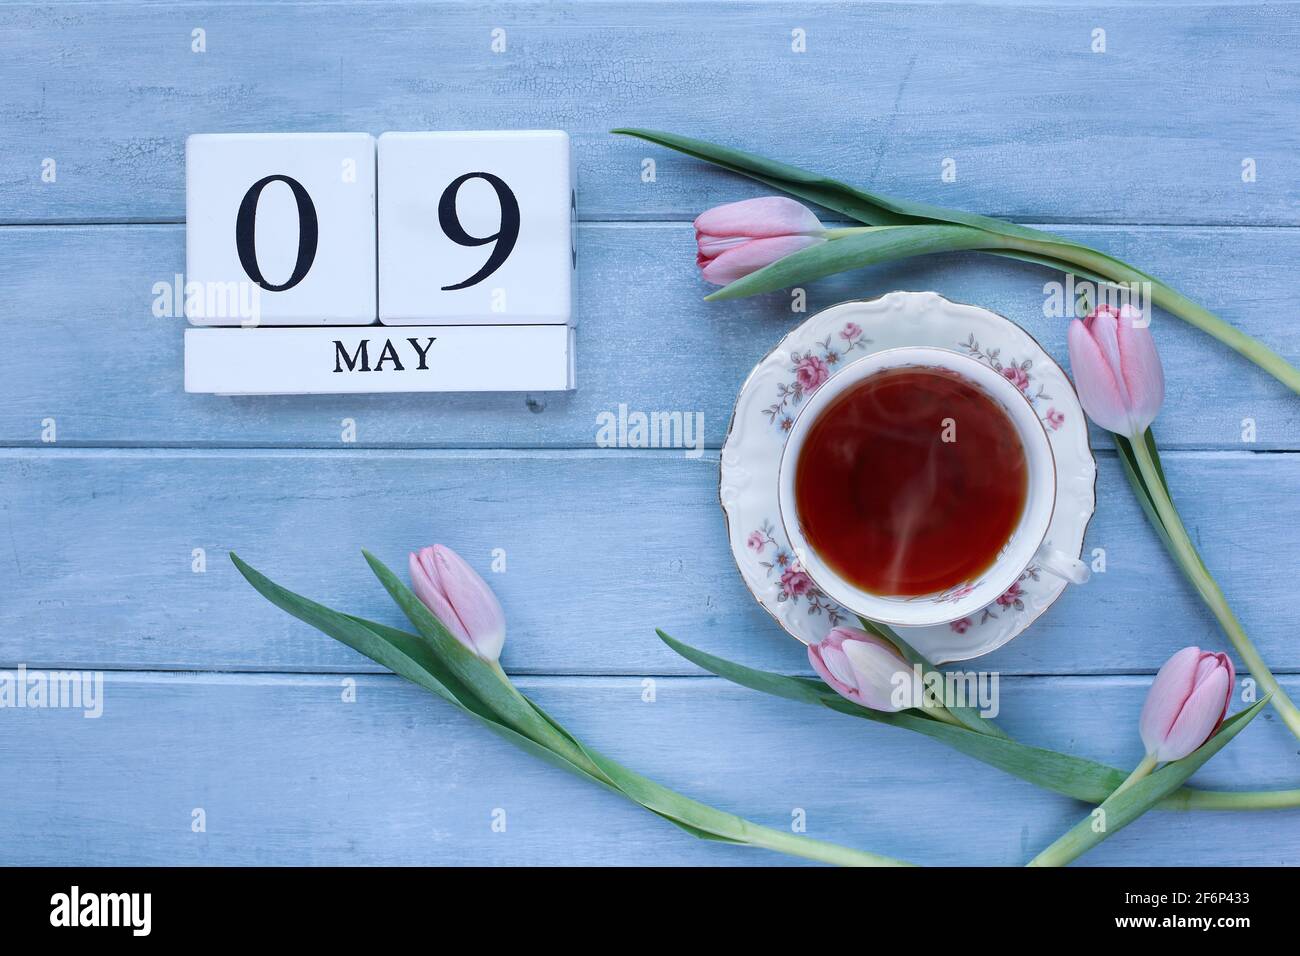 White wood calendar blocks with the date May 09 and pink tulip flowers with tea over blue wooden background for Mother's Day. Stock Photo